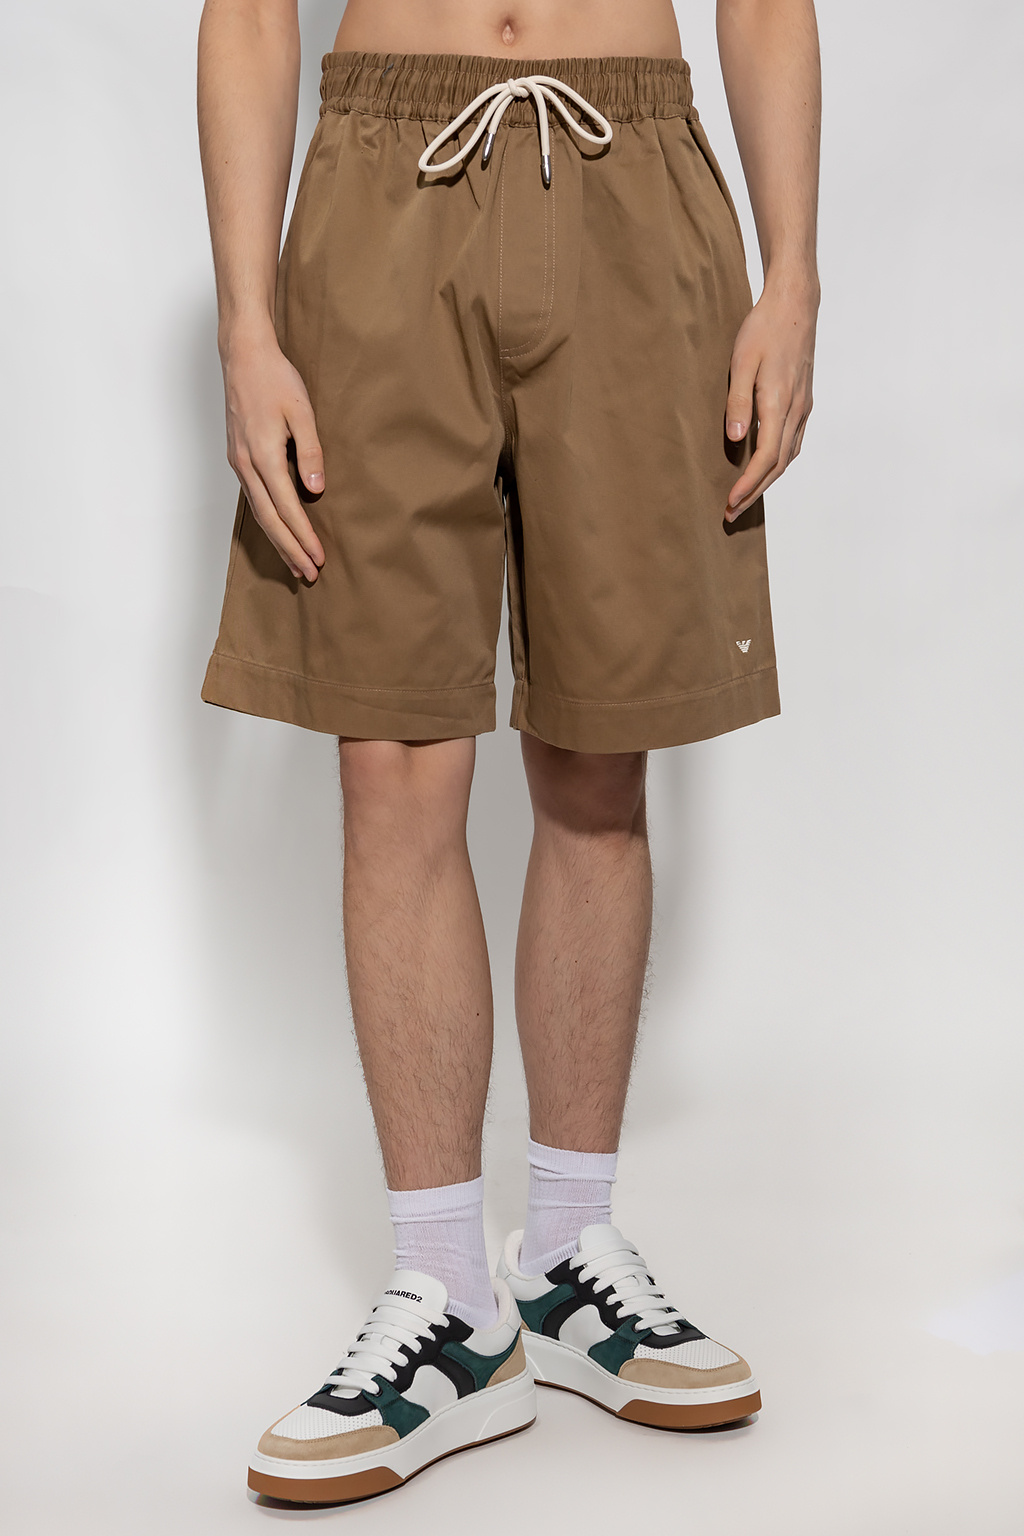 Emporio Armani ‘Sustainable’ collection shorts